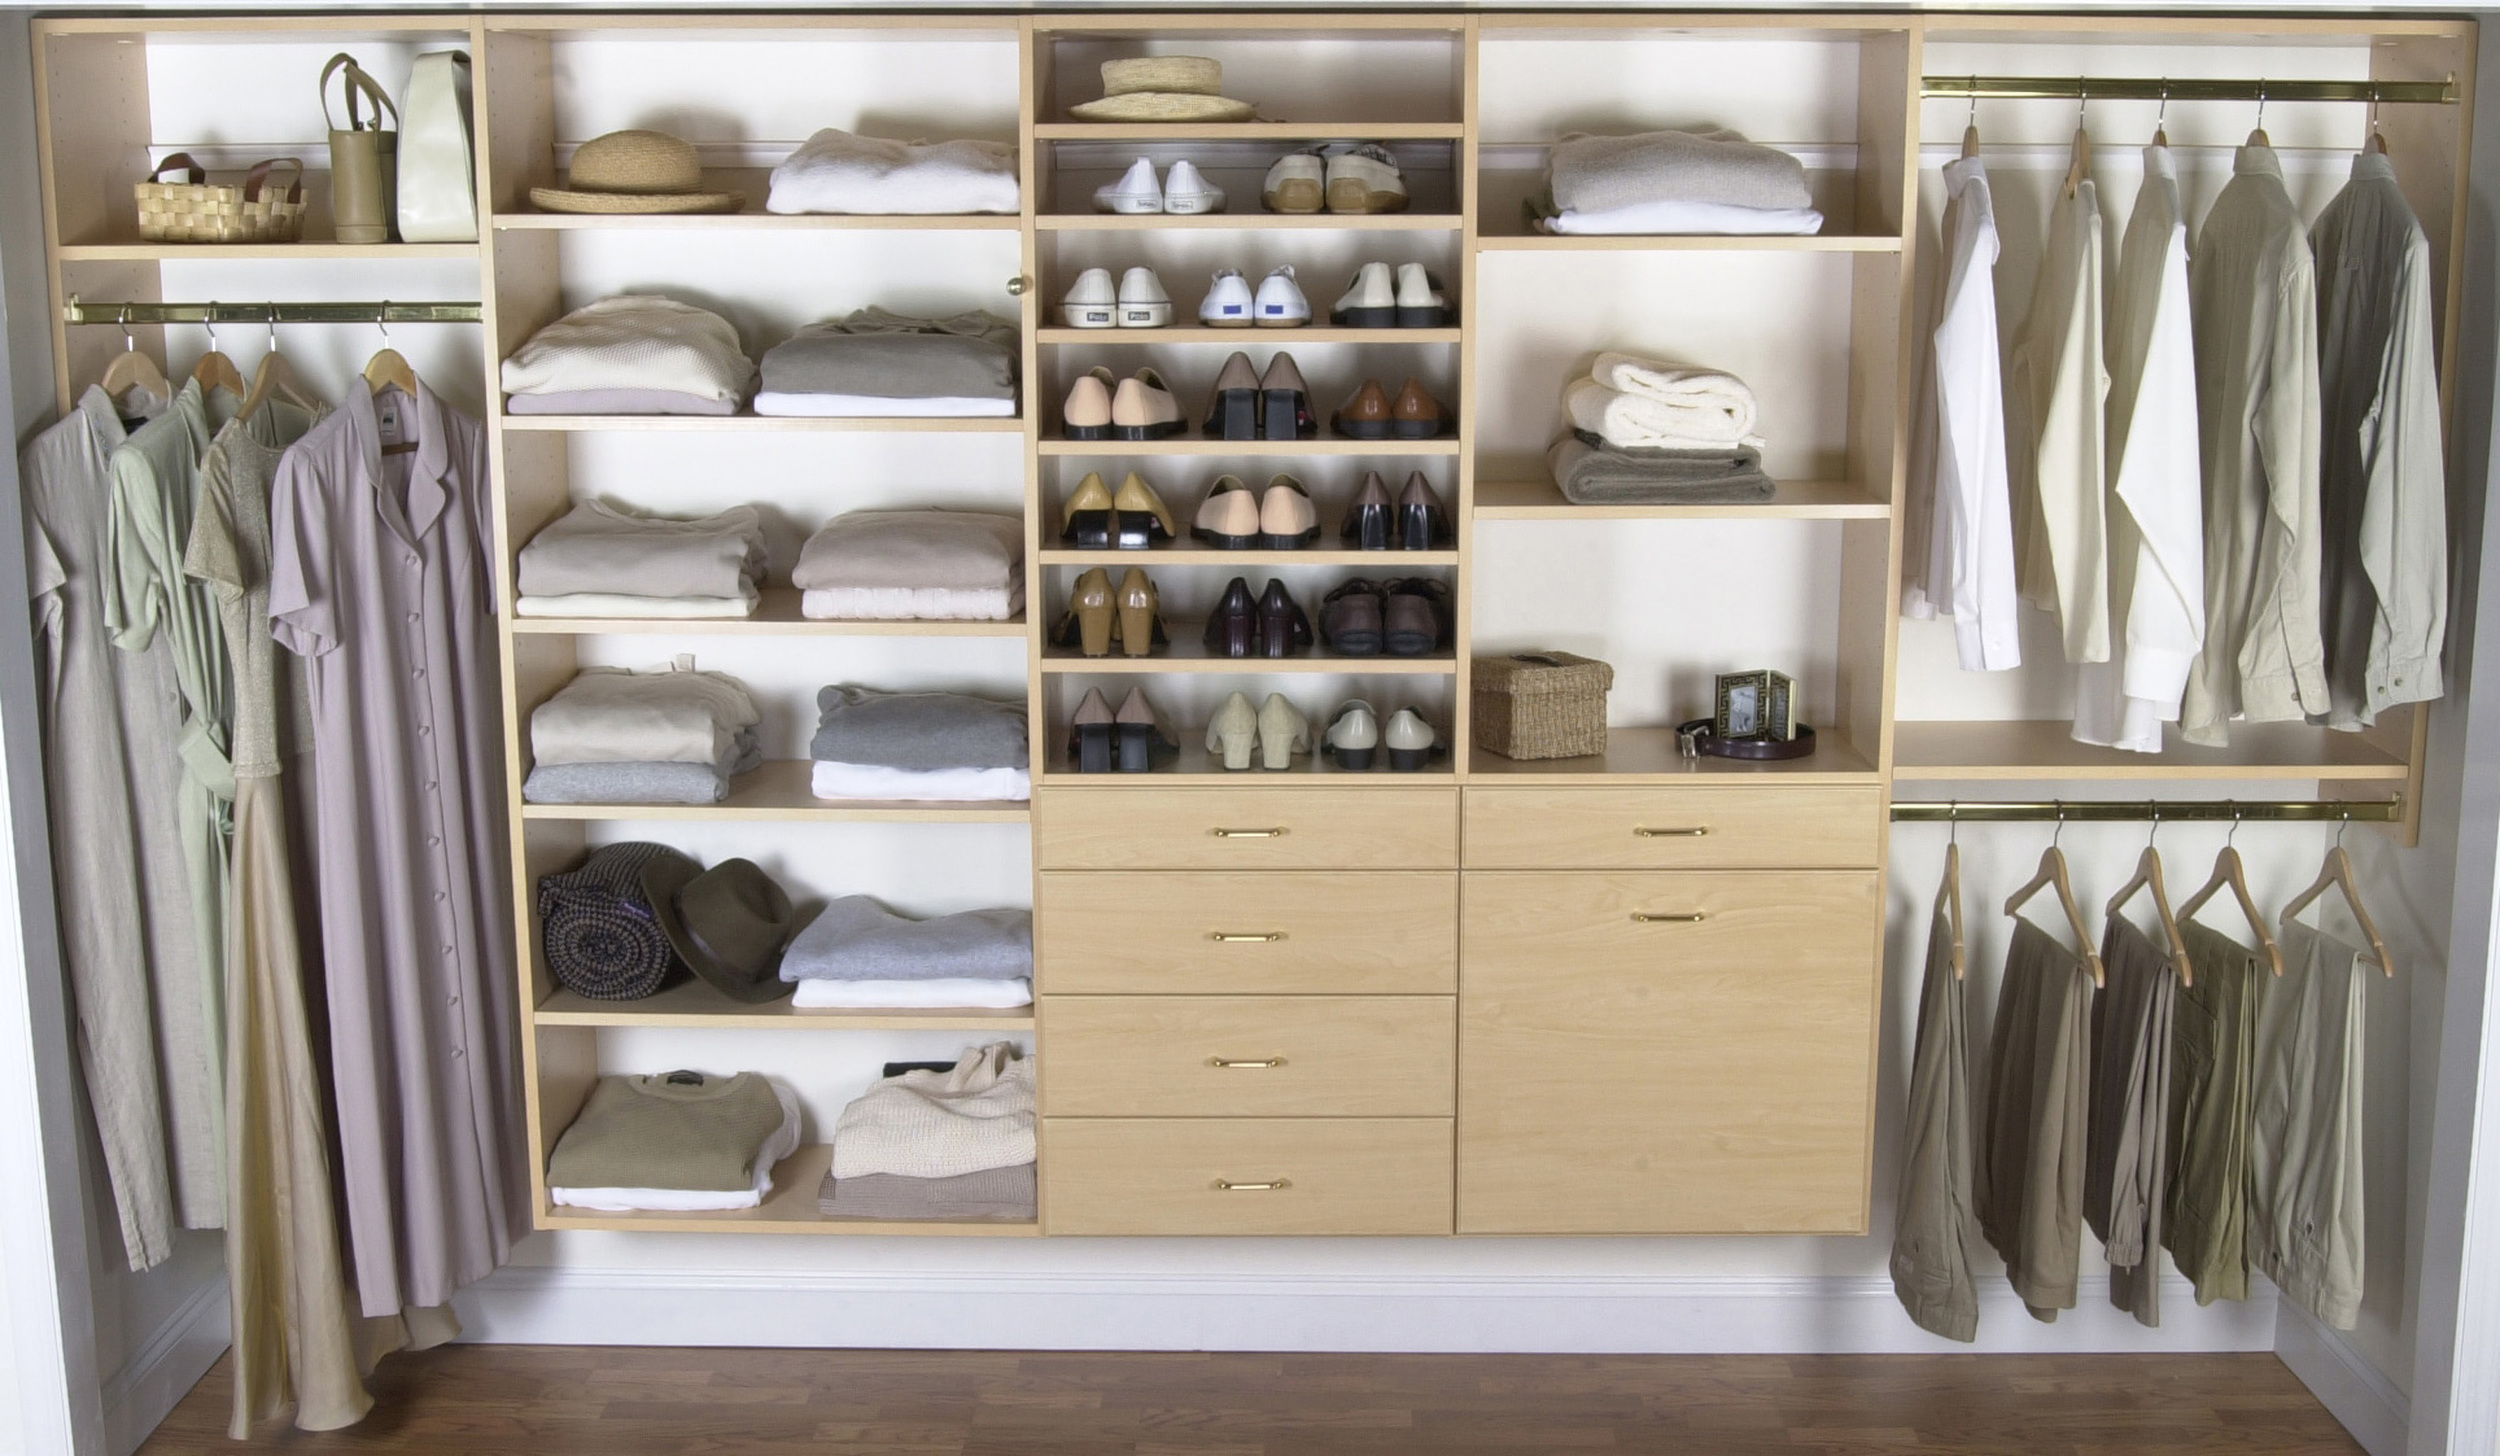  bring order to your home with a revamp of your storage and organization today! 